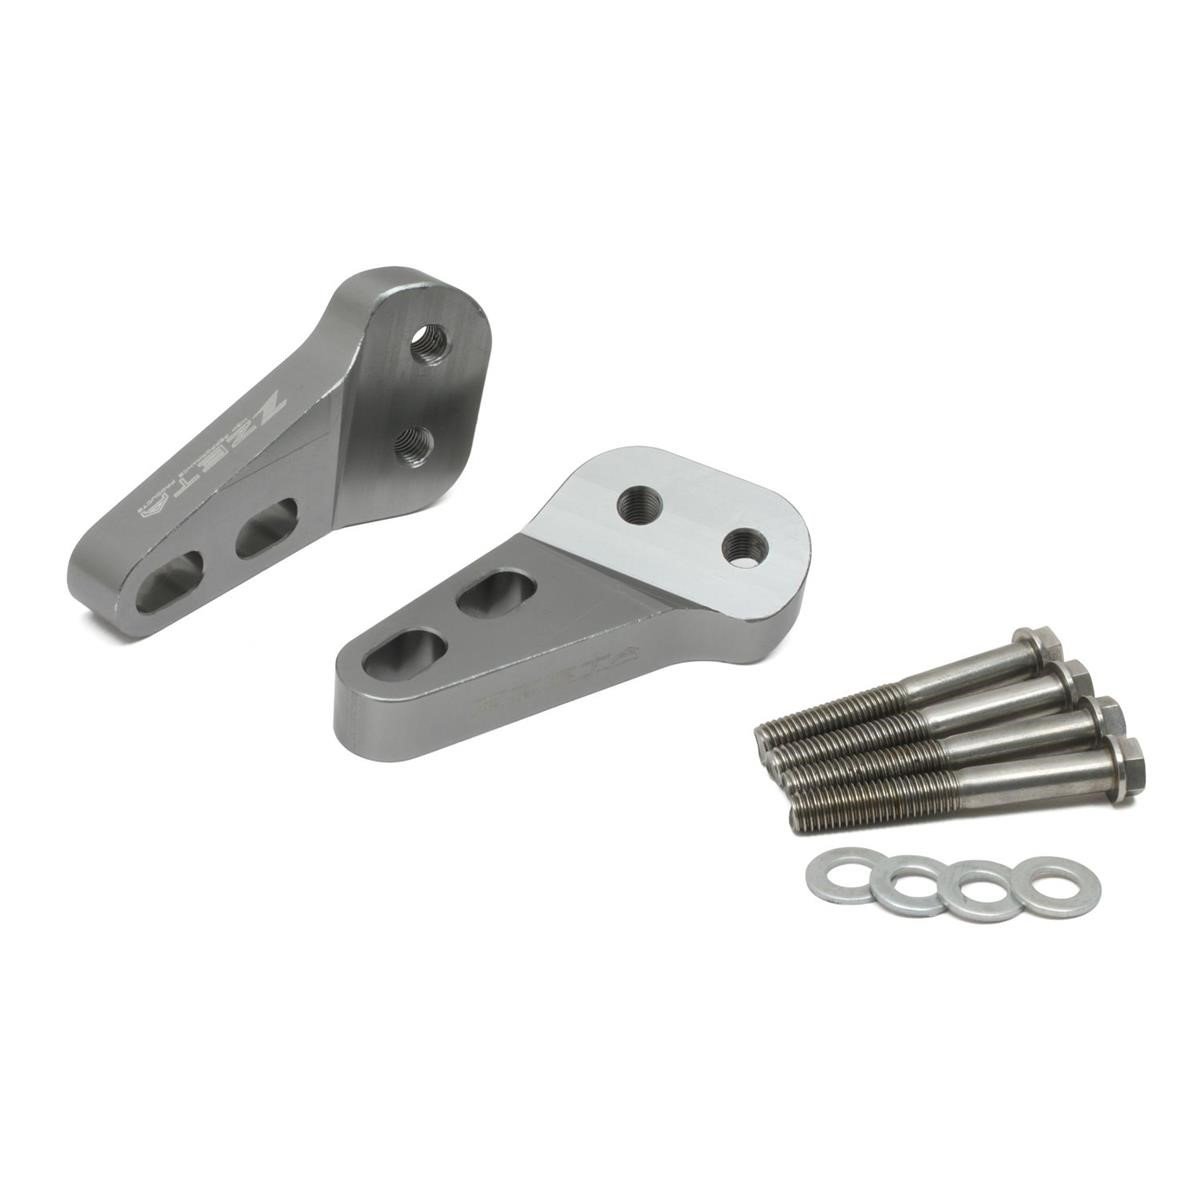 Zeta Handguards Mounting Kit Armor Front Mounting on the Fork Clamp